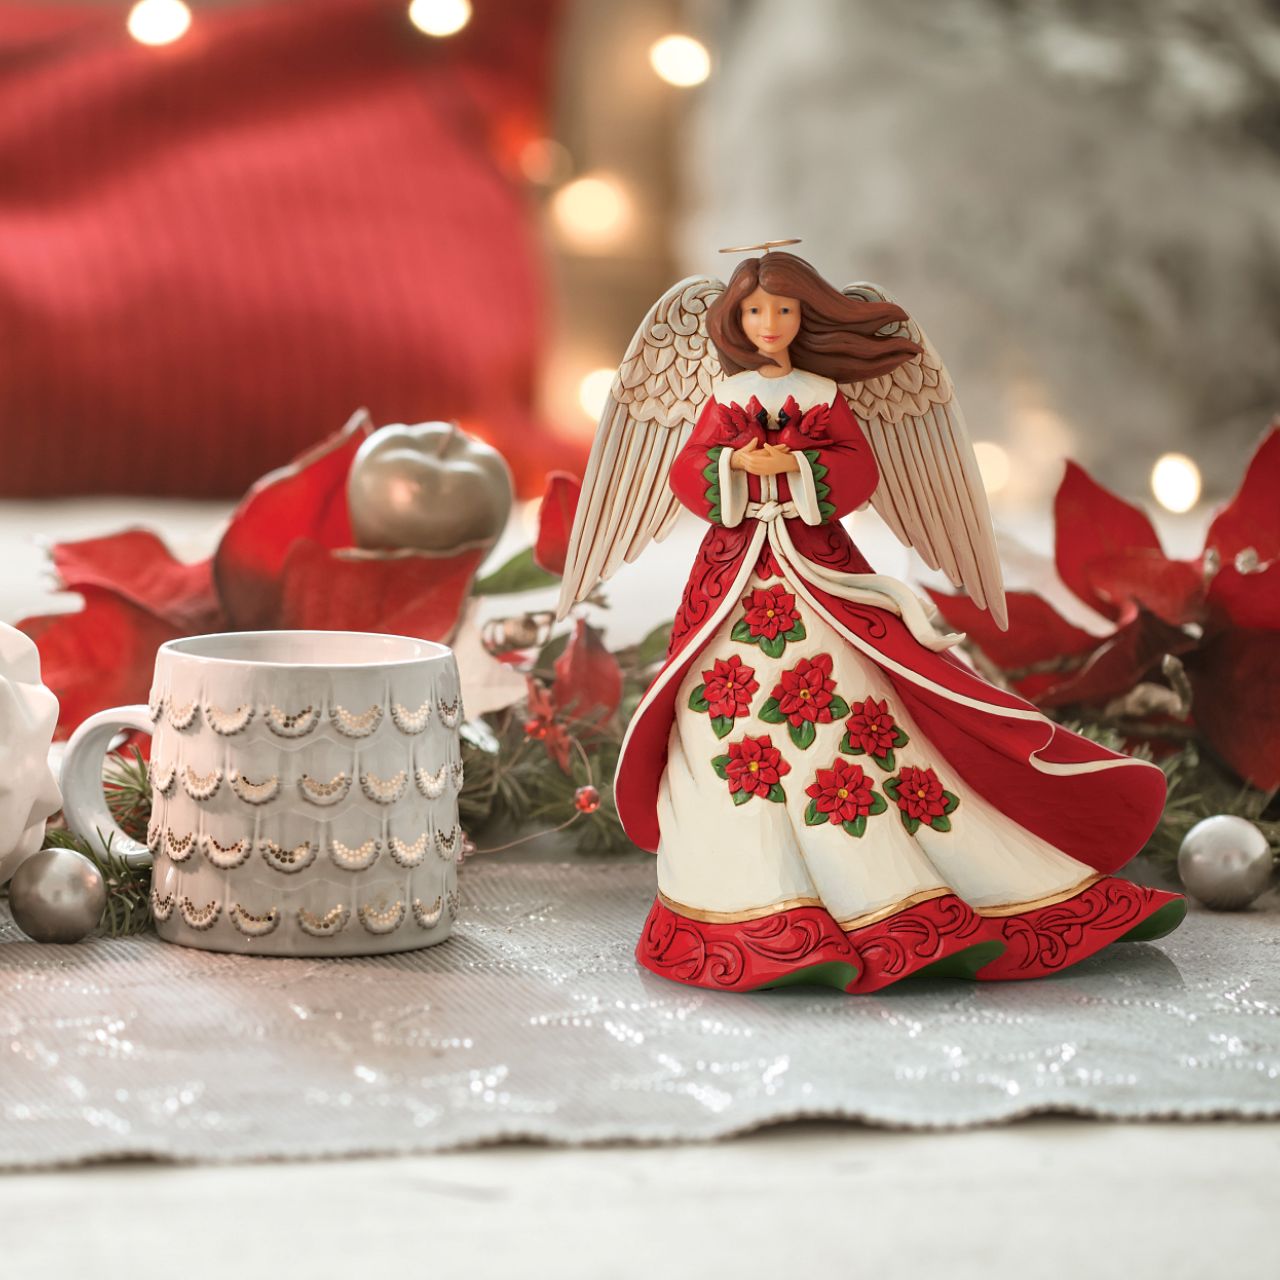 Heartwood Creek Christmas Angel Figurine  Celebrate Christmas this year with this beautiful Heartwood Creek collection figurine by Jim Shore. This beautiful hand crafted and hand painted Christmas Angel figurine would look beautiful in any home.